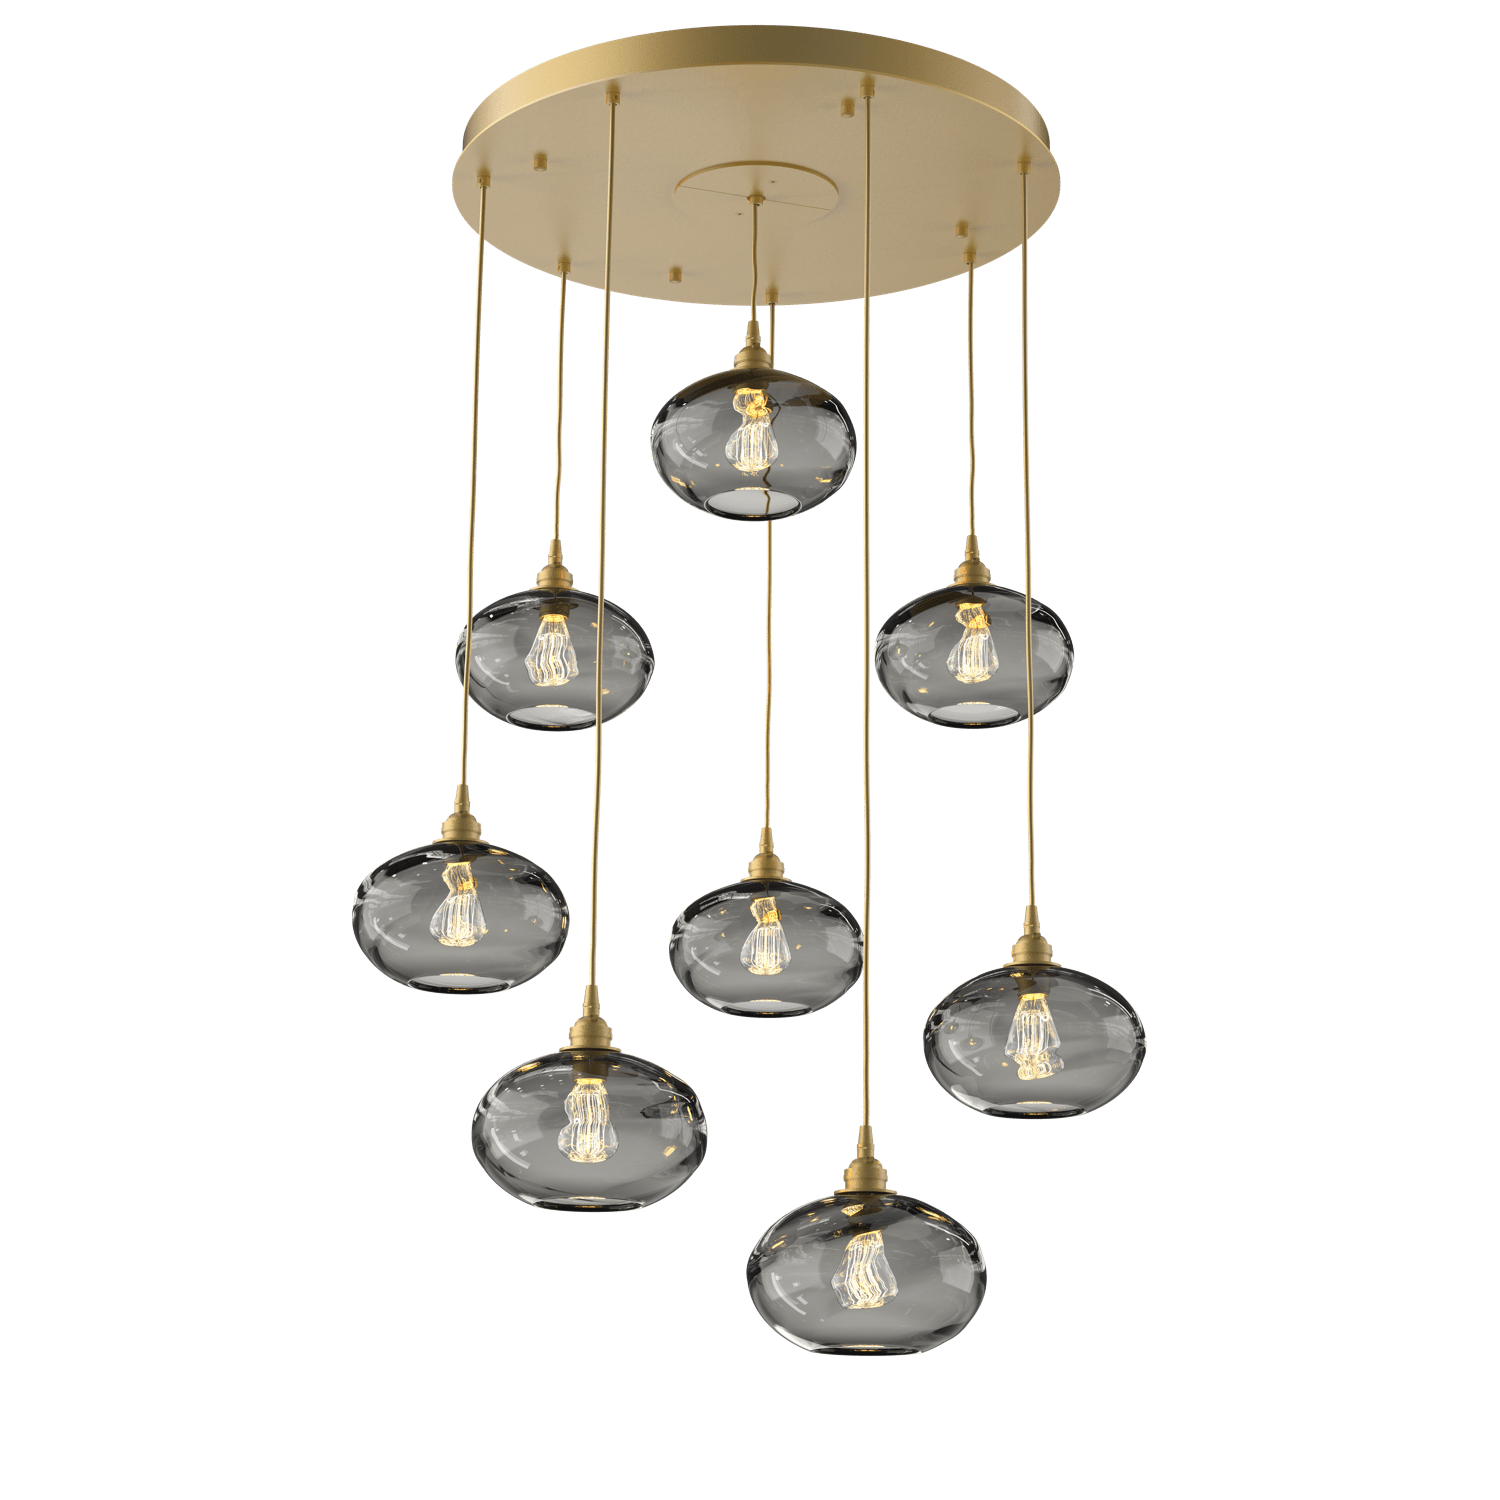 CHB0036-08-GB-OS-Hammerton-Studio-Optic-Blown-Glass-Coppa-8-light-round-pendant-chandelier-with-gilded-brass-finish-and-optic-smoke-blown-glass-shades-and-incandescent-lamping